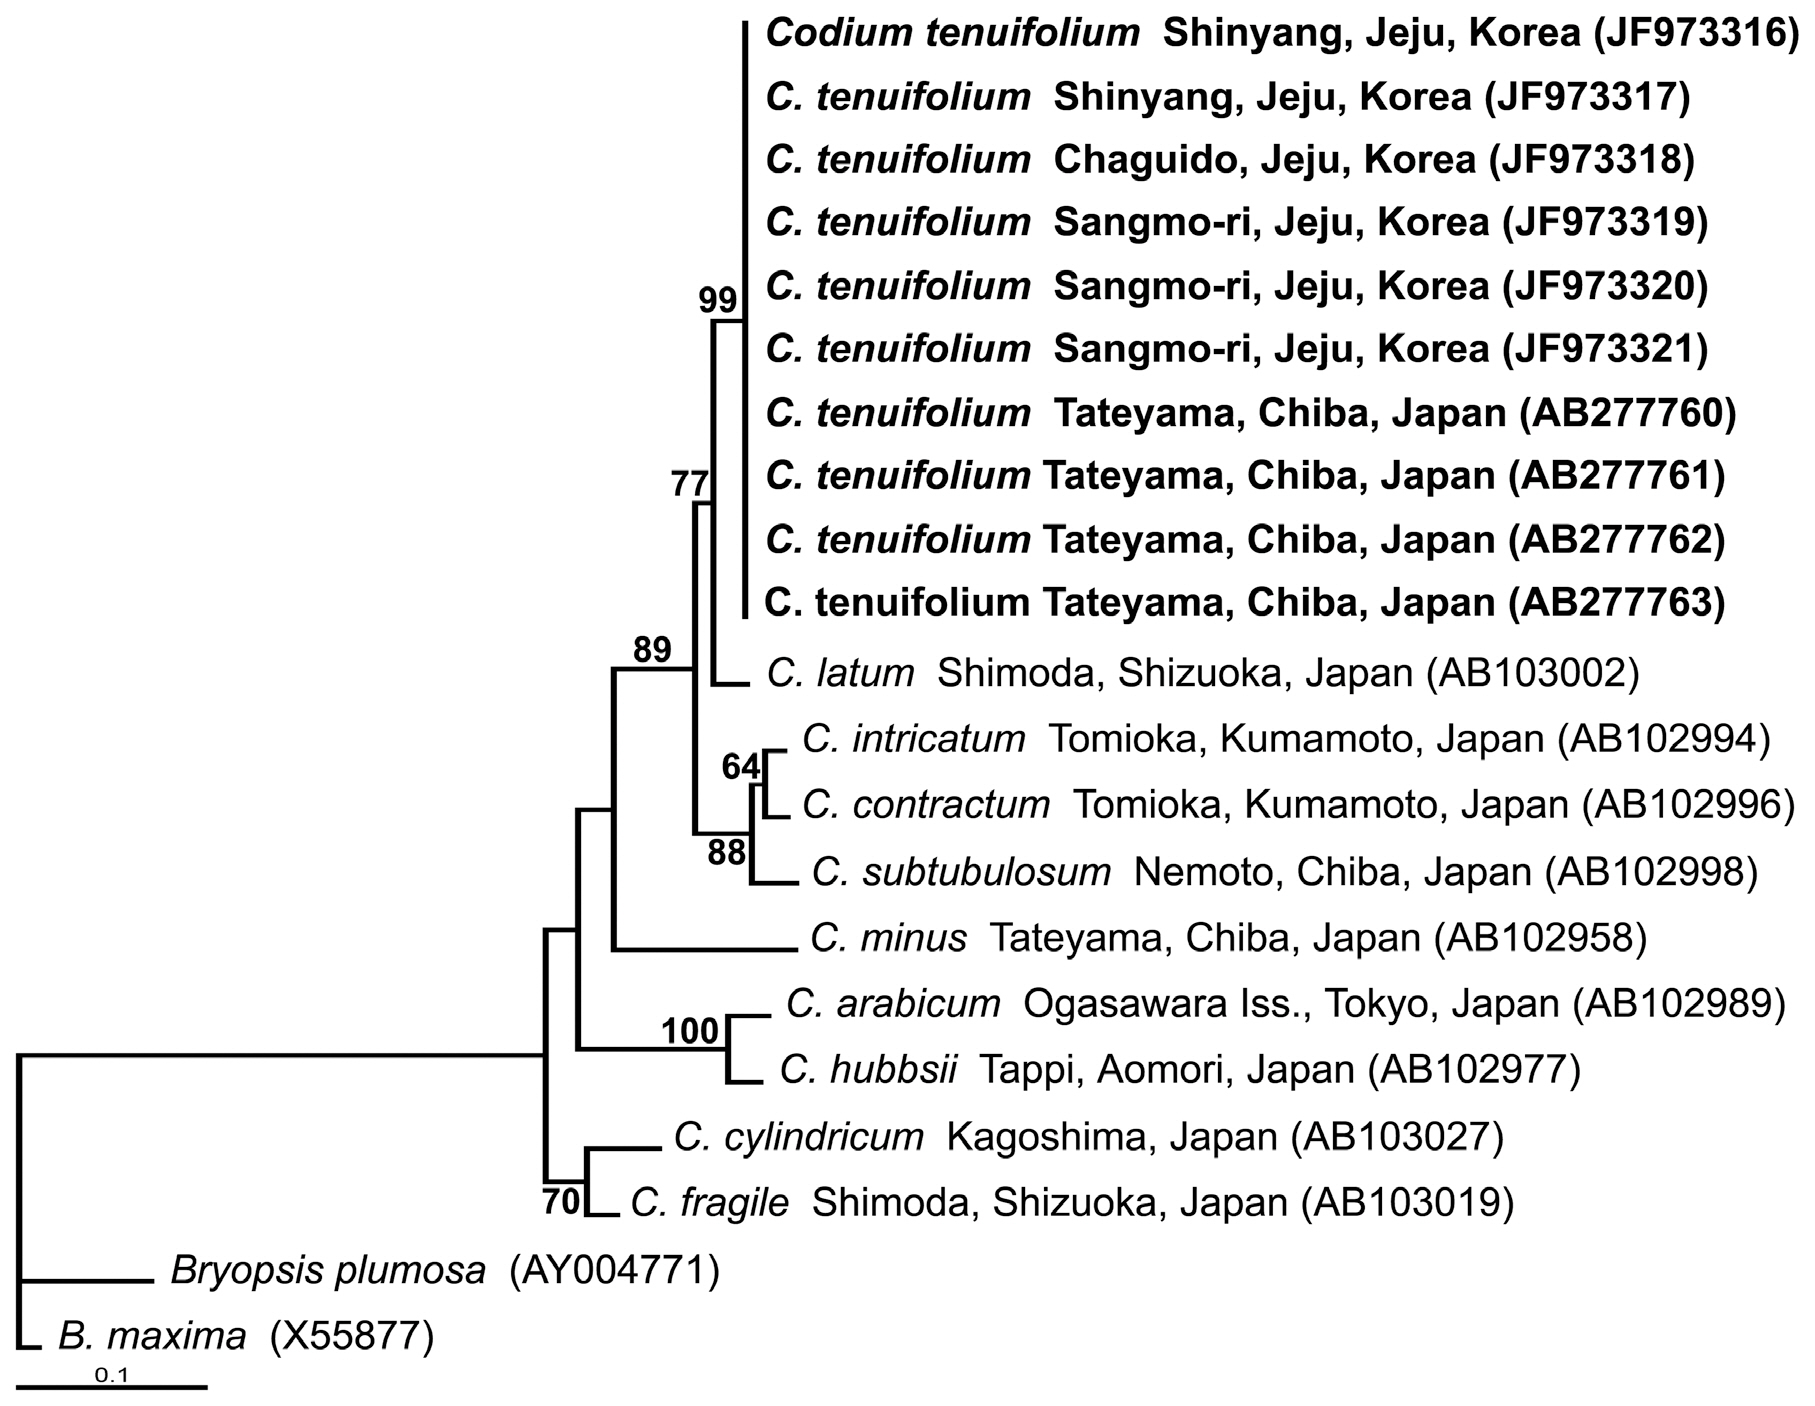 Phylogenetic tree of  Codium species inferred from maximum likelihood analysis of chloroplast encoded rbcL sequences. The bootstrap values shown above the branches are from 1000 bootstrap resamplings.